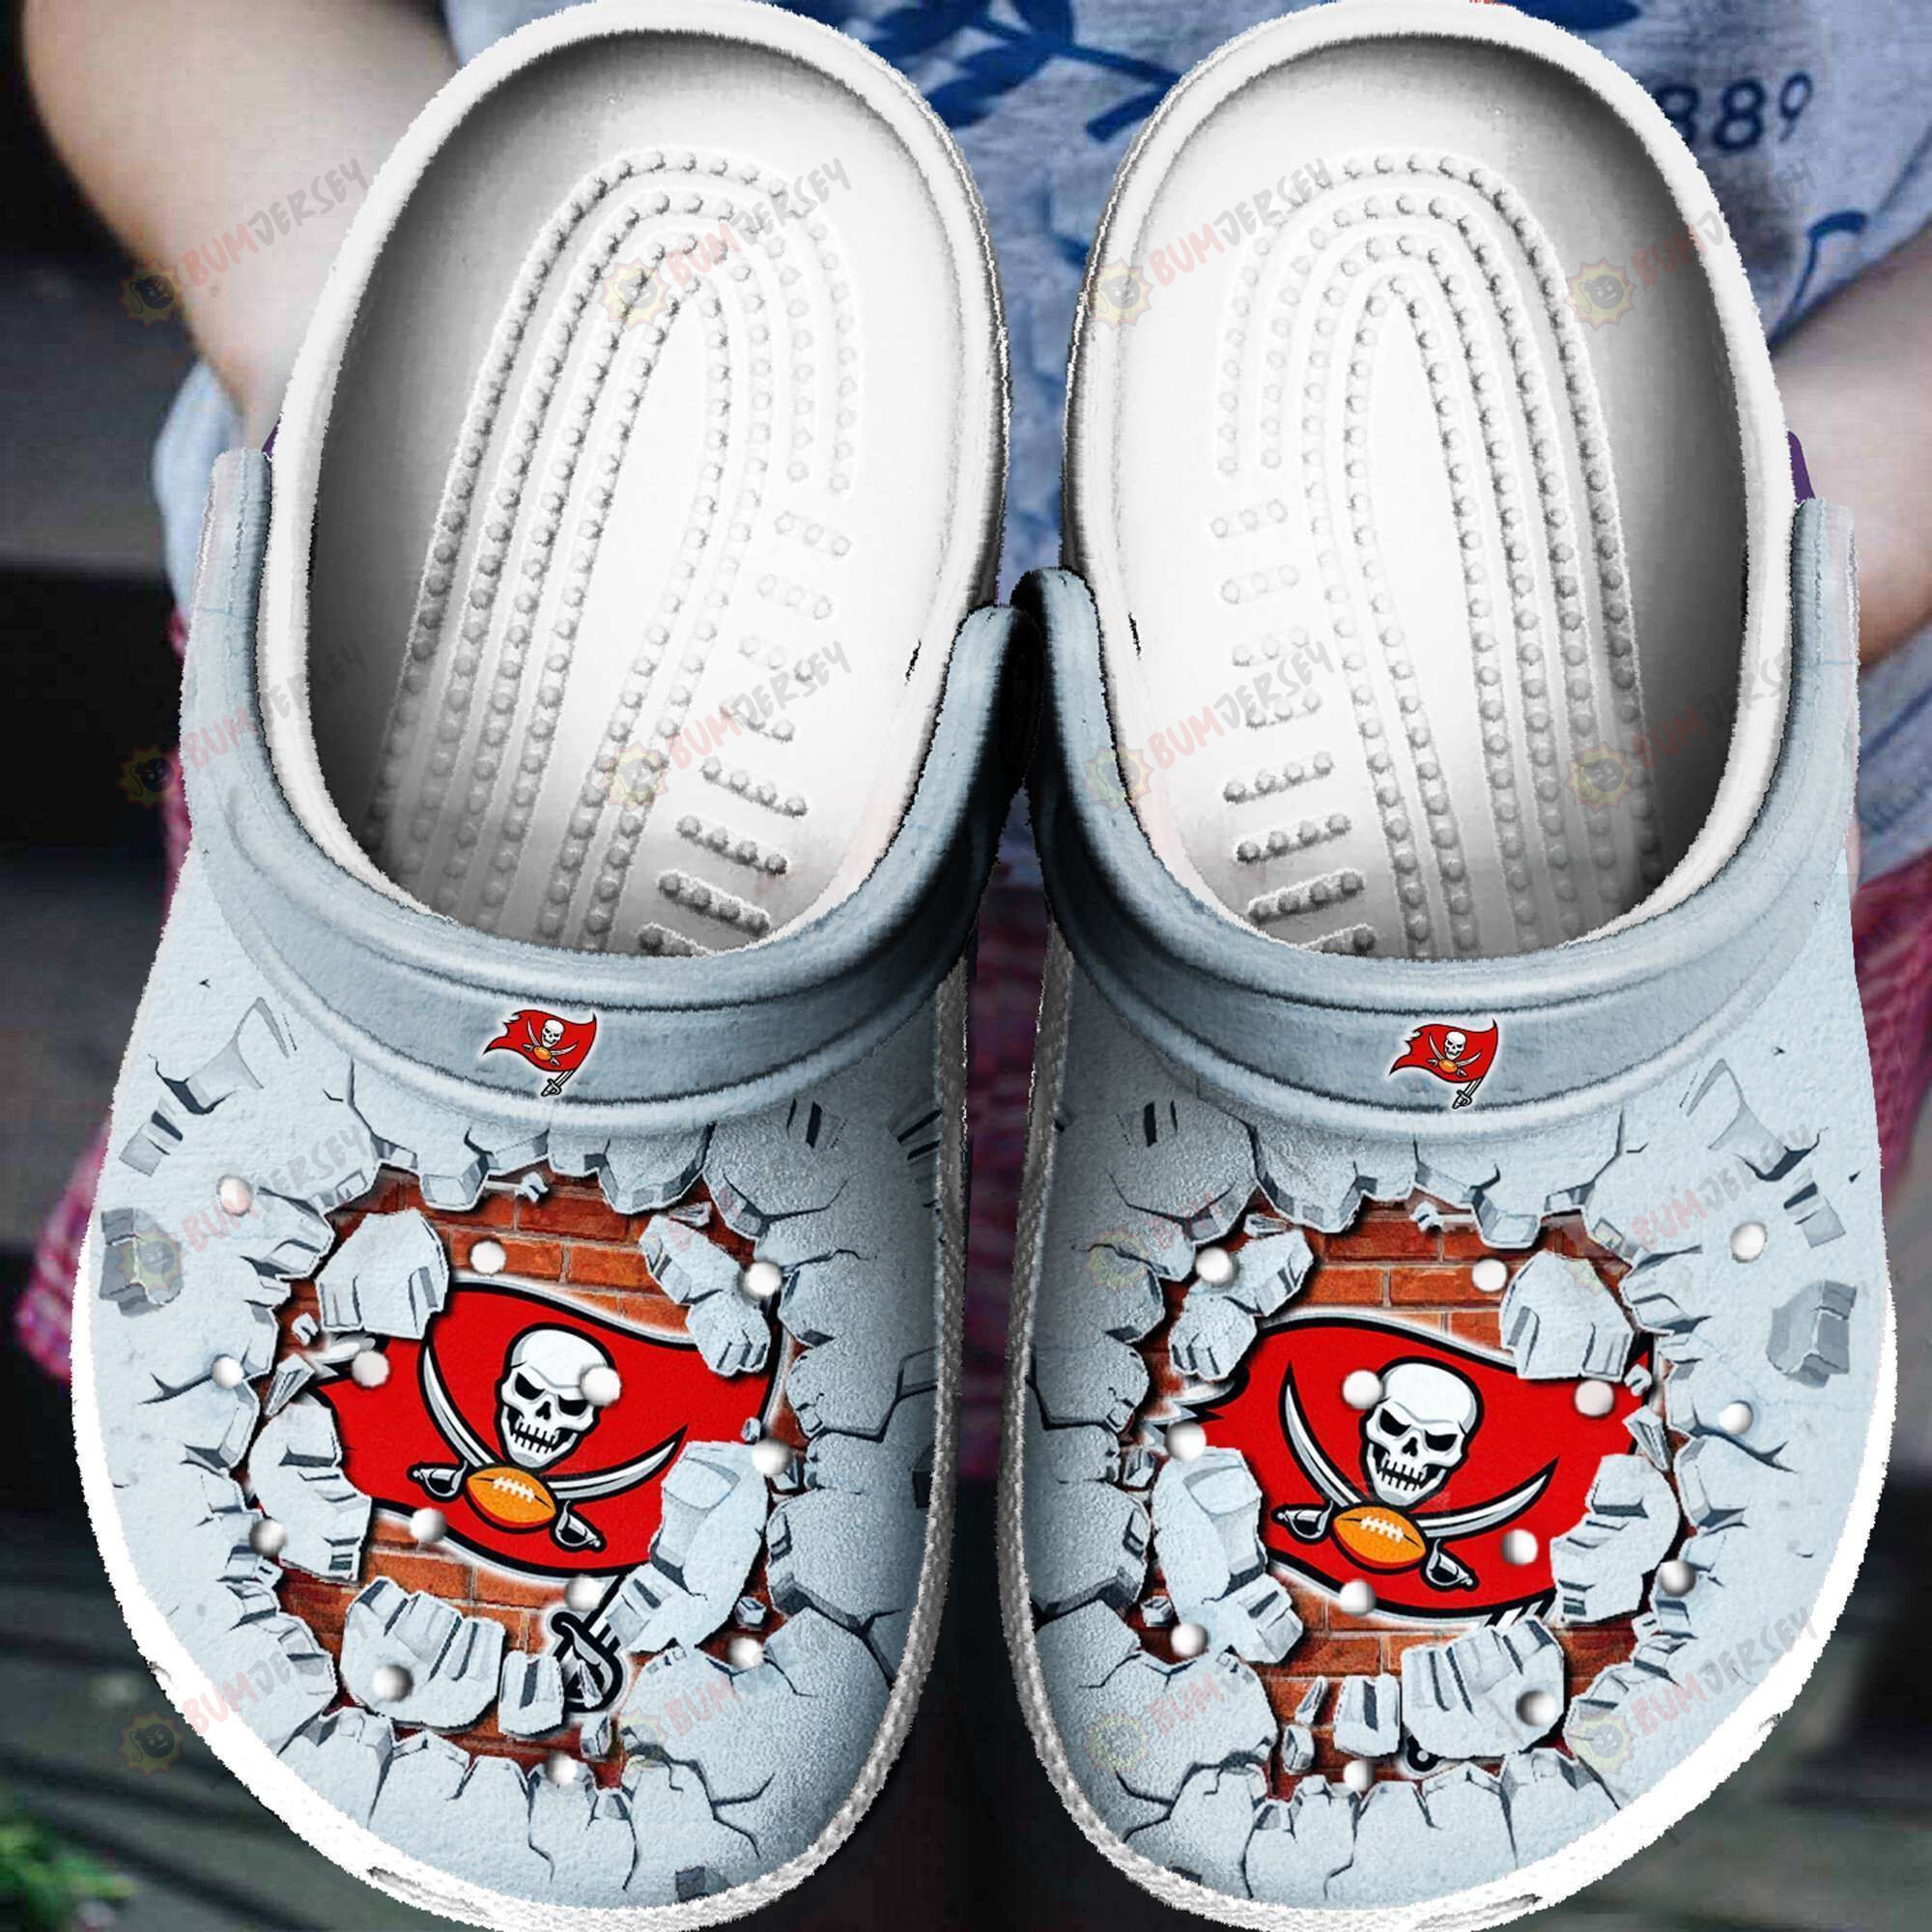 Tampa Bay Buccaneers Skull Pattern Crocs Classic Clogs Shoes In Blue & Red – Aop Clog